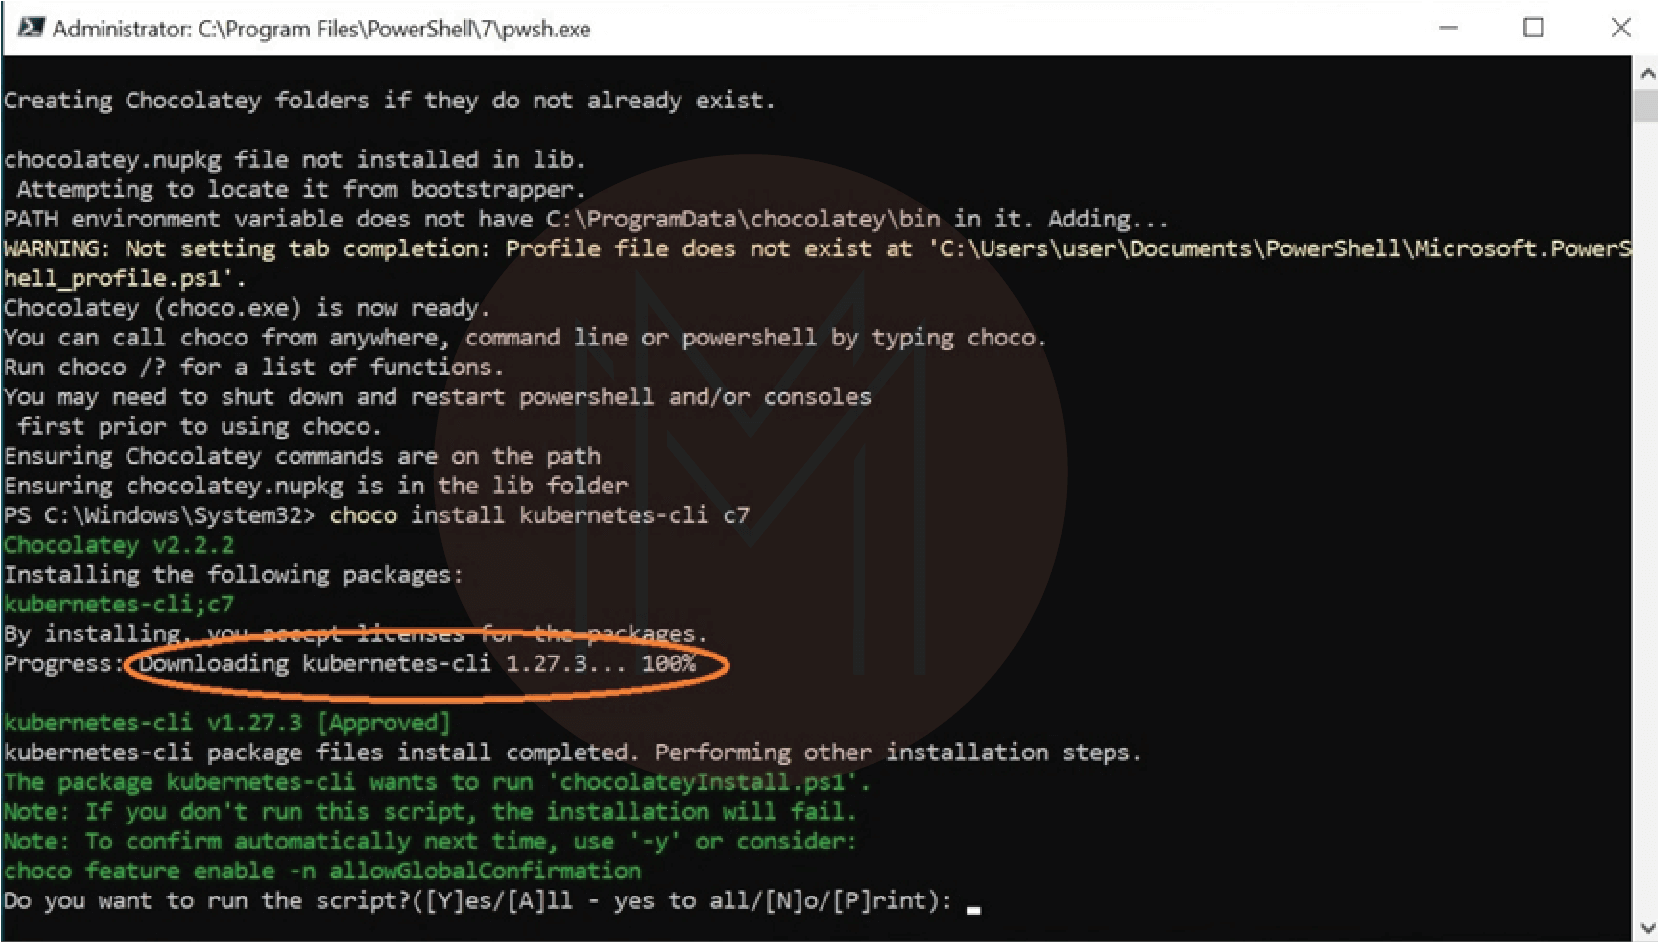 connect to cluster with Kubectl leveraging the Chocolatey installer